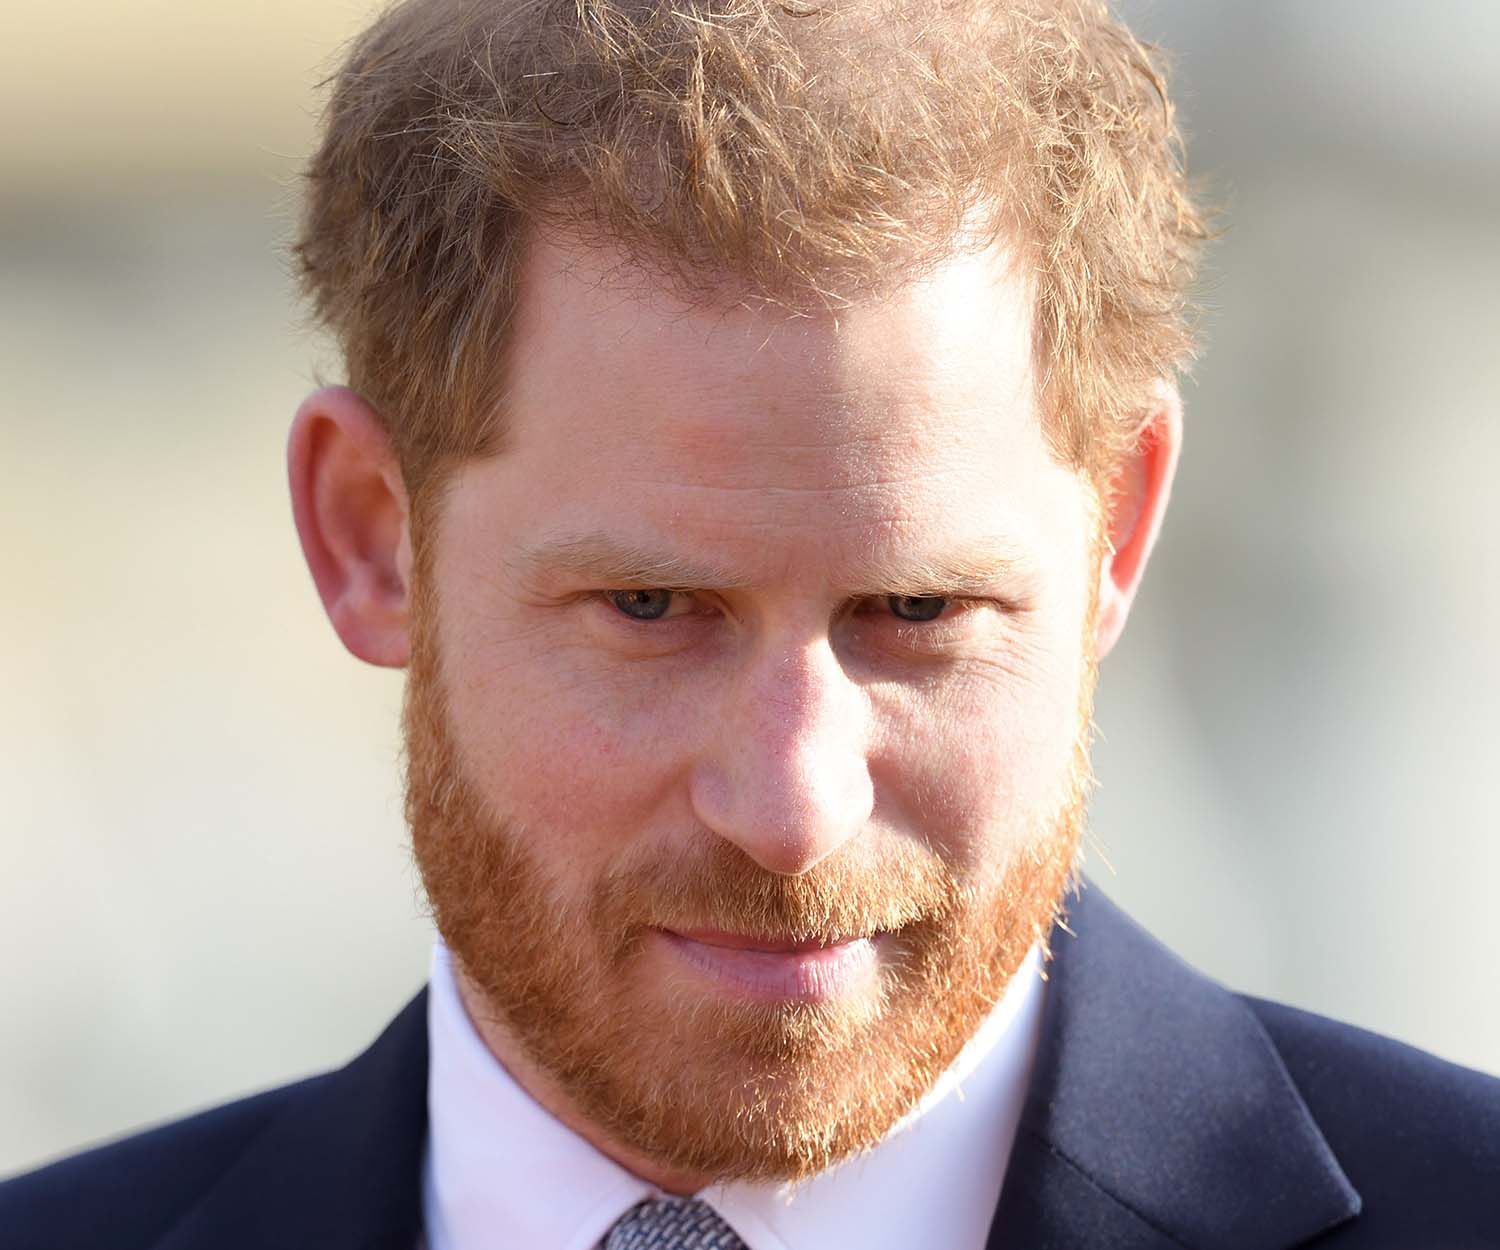 A friend of Prince Harry’s says Harry was really suffering before he stepped back from royal life